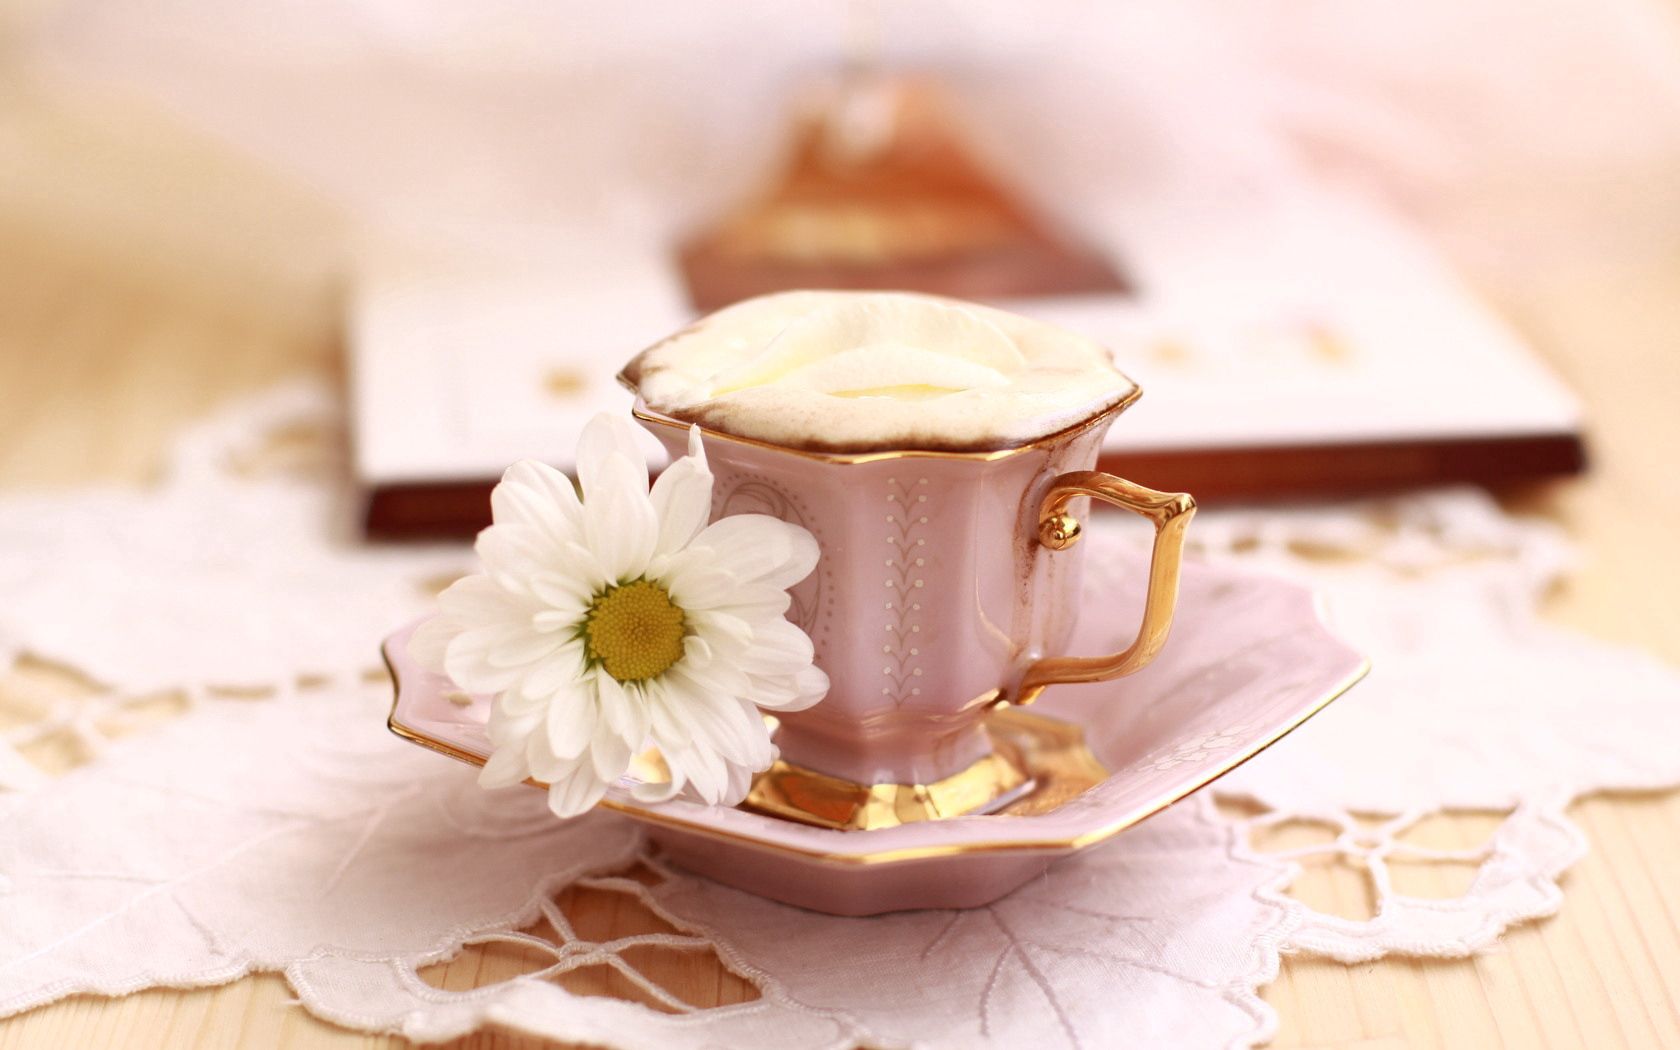 133199 download wallpaper coffee, flowers, food, summer, still life, cup, bouquet, morning, basket, breakfast screensavers and pictures for free